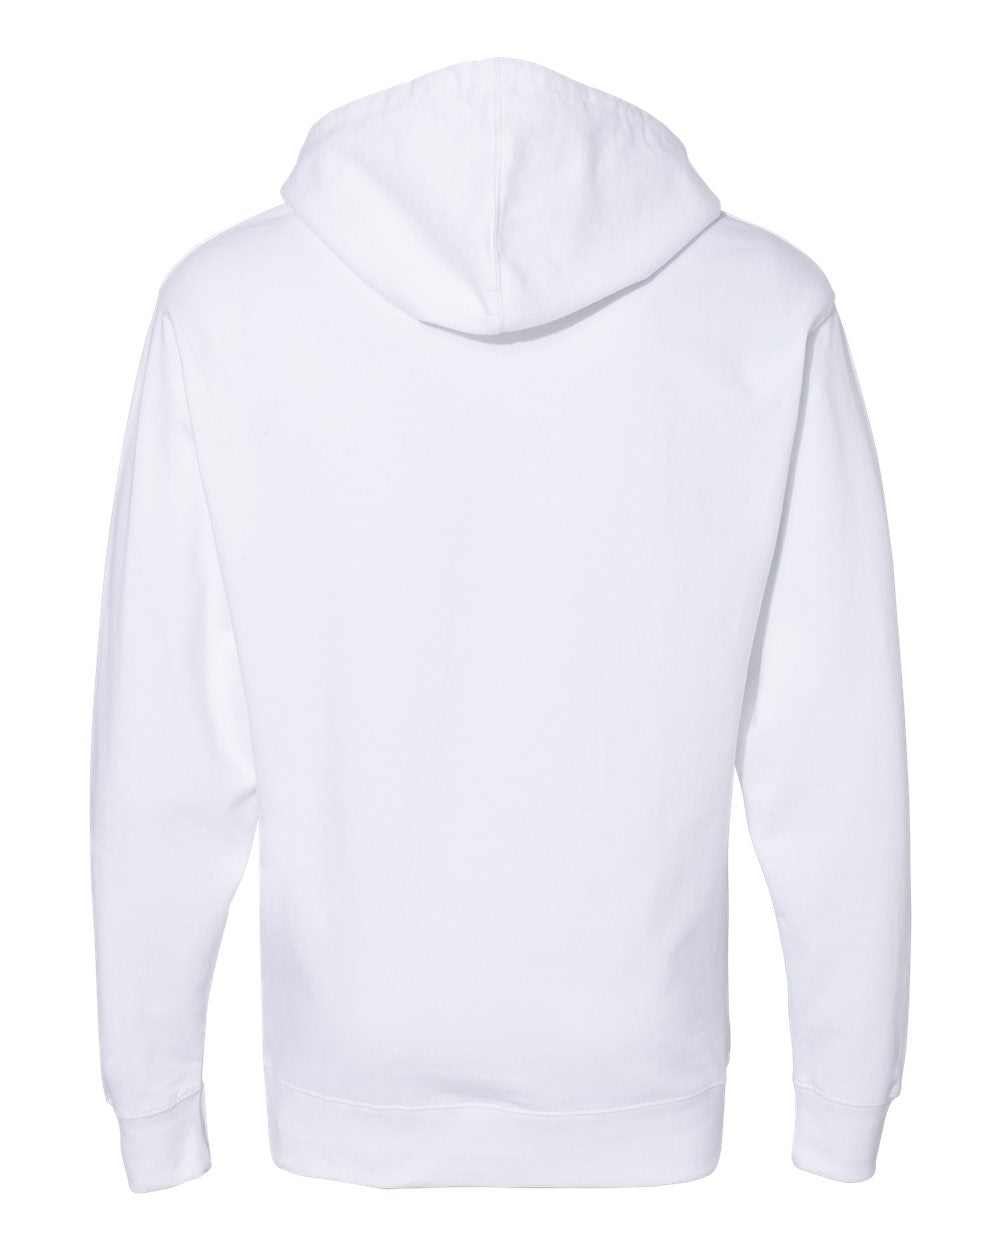 Independent Midweight Hooded Sweatshirt - SS4500